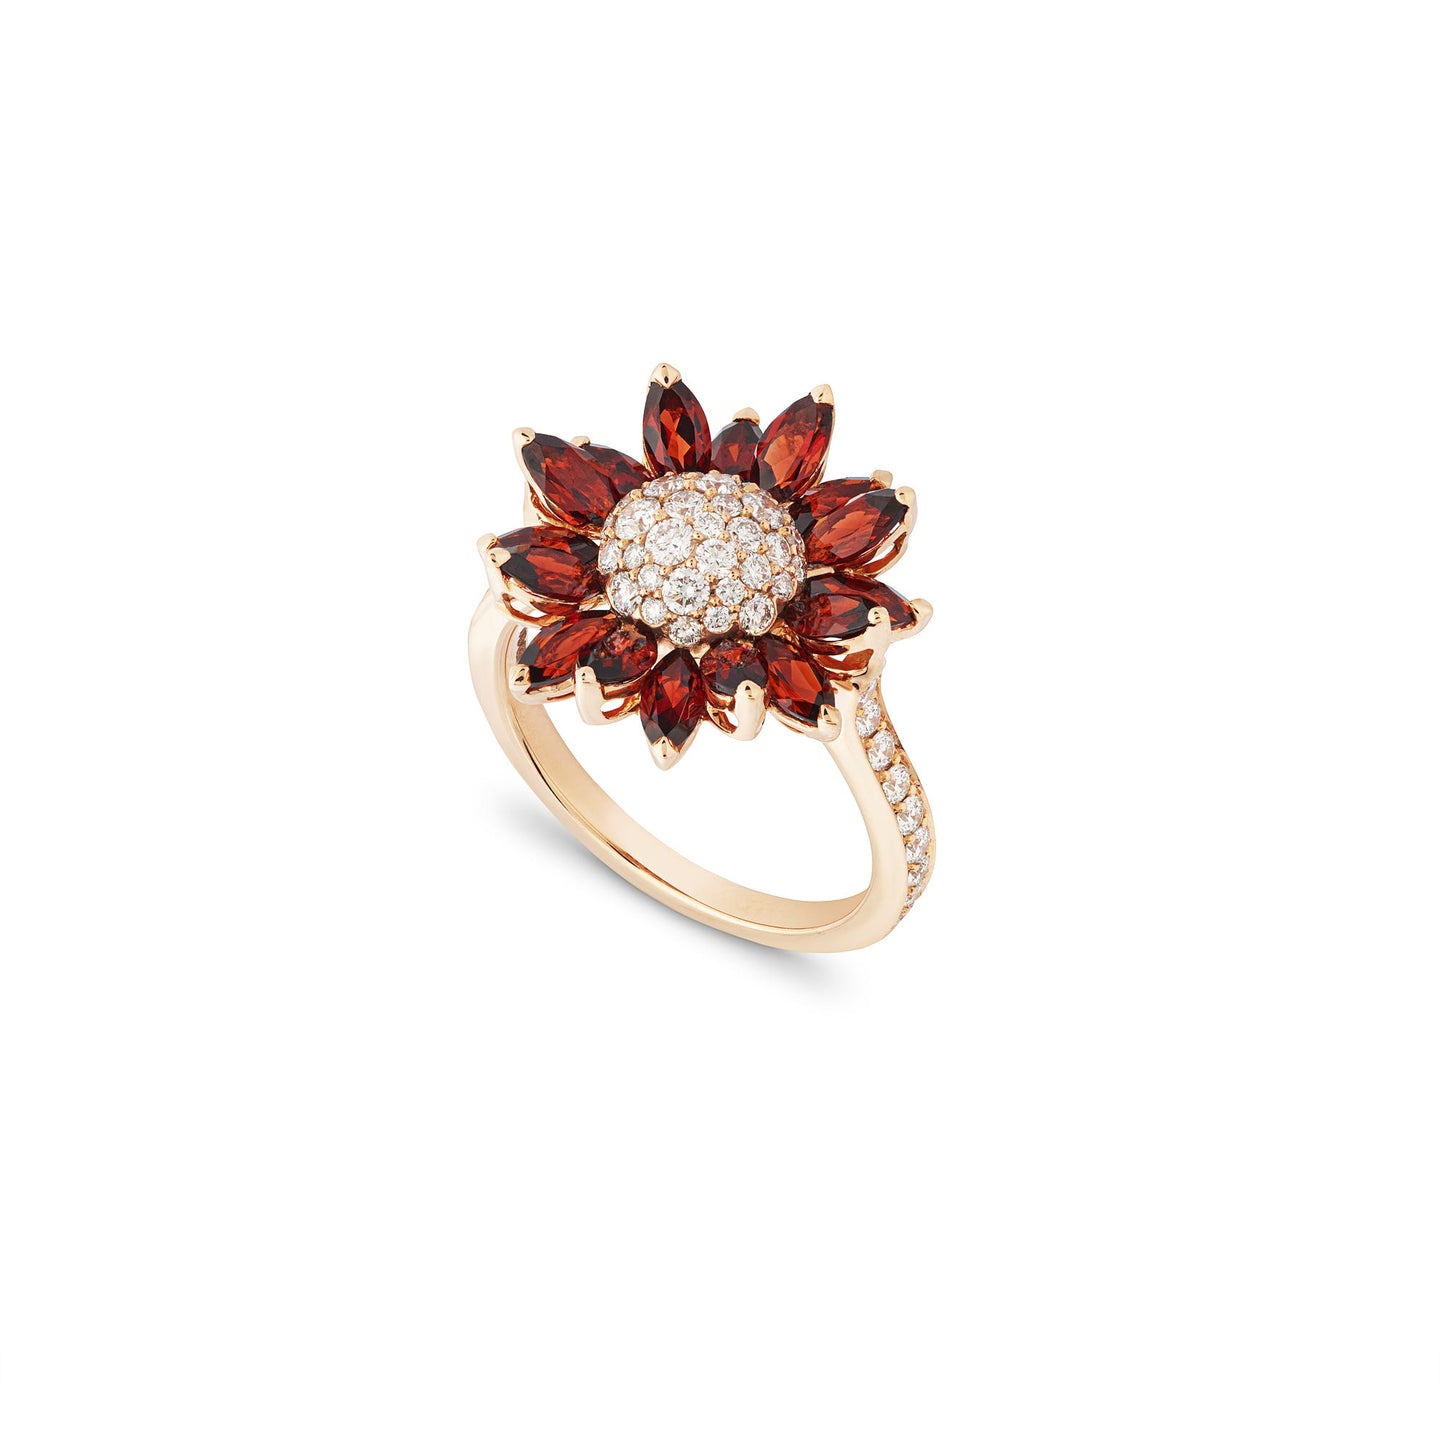 Daisy Small Ring in 18ct Rose Gold with Garnet and Diamonds